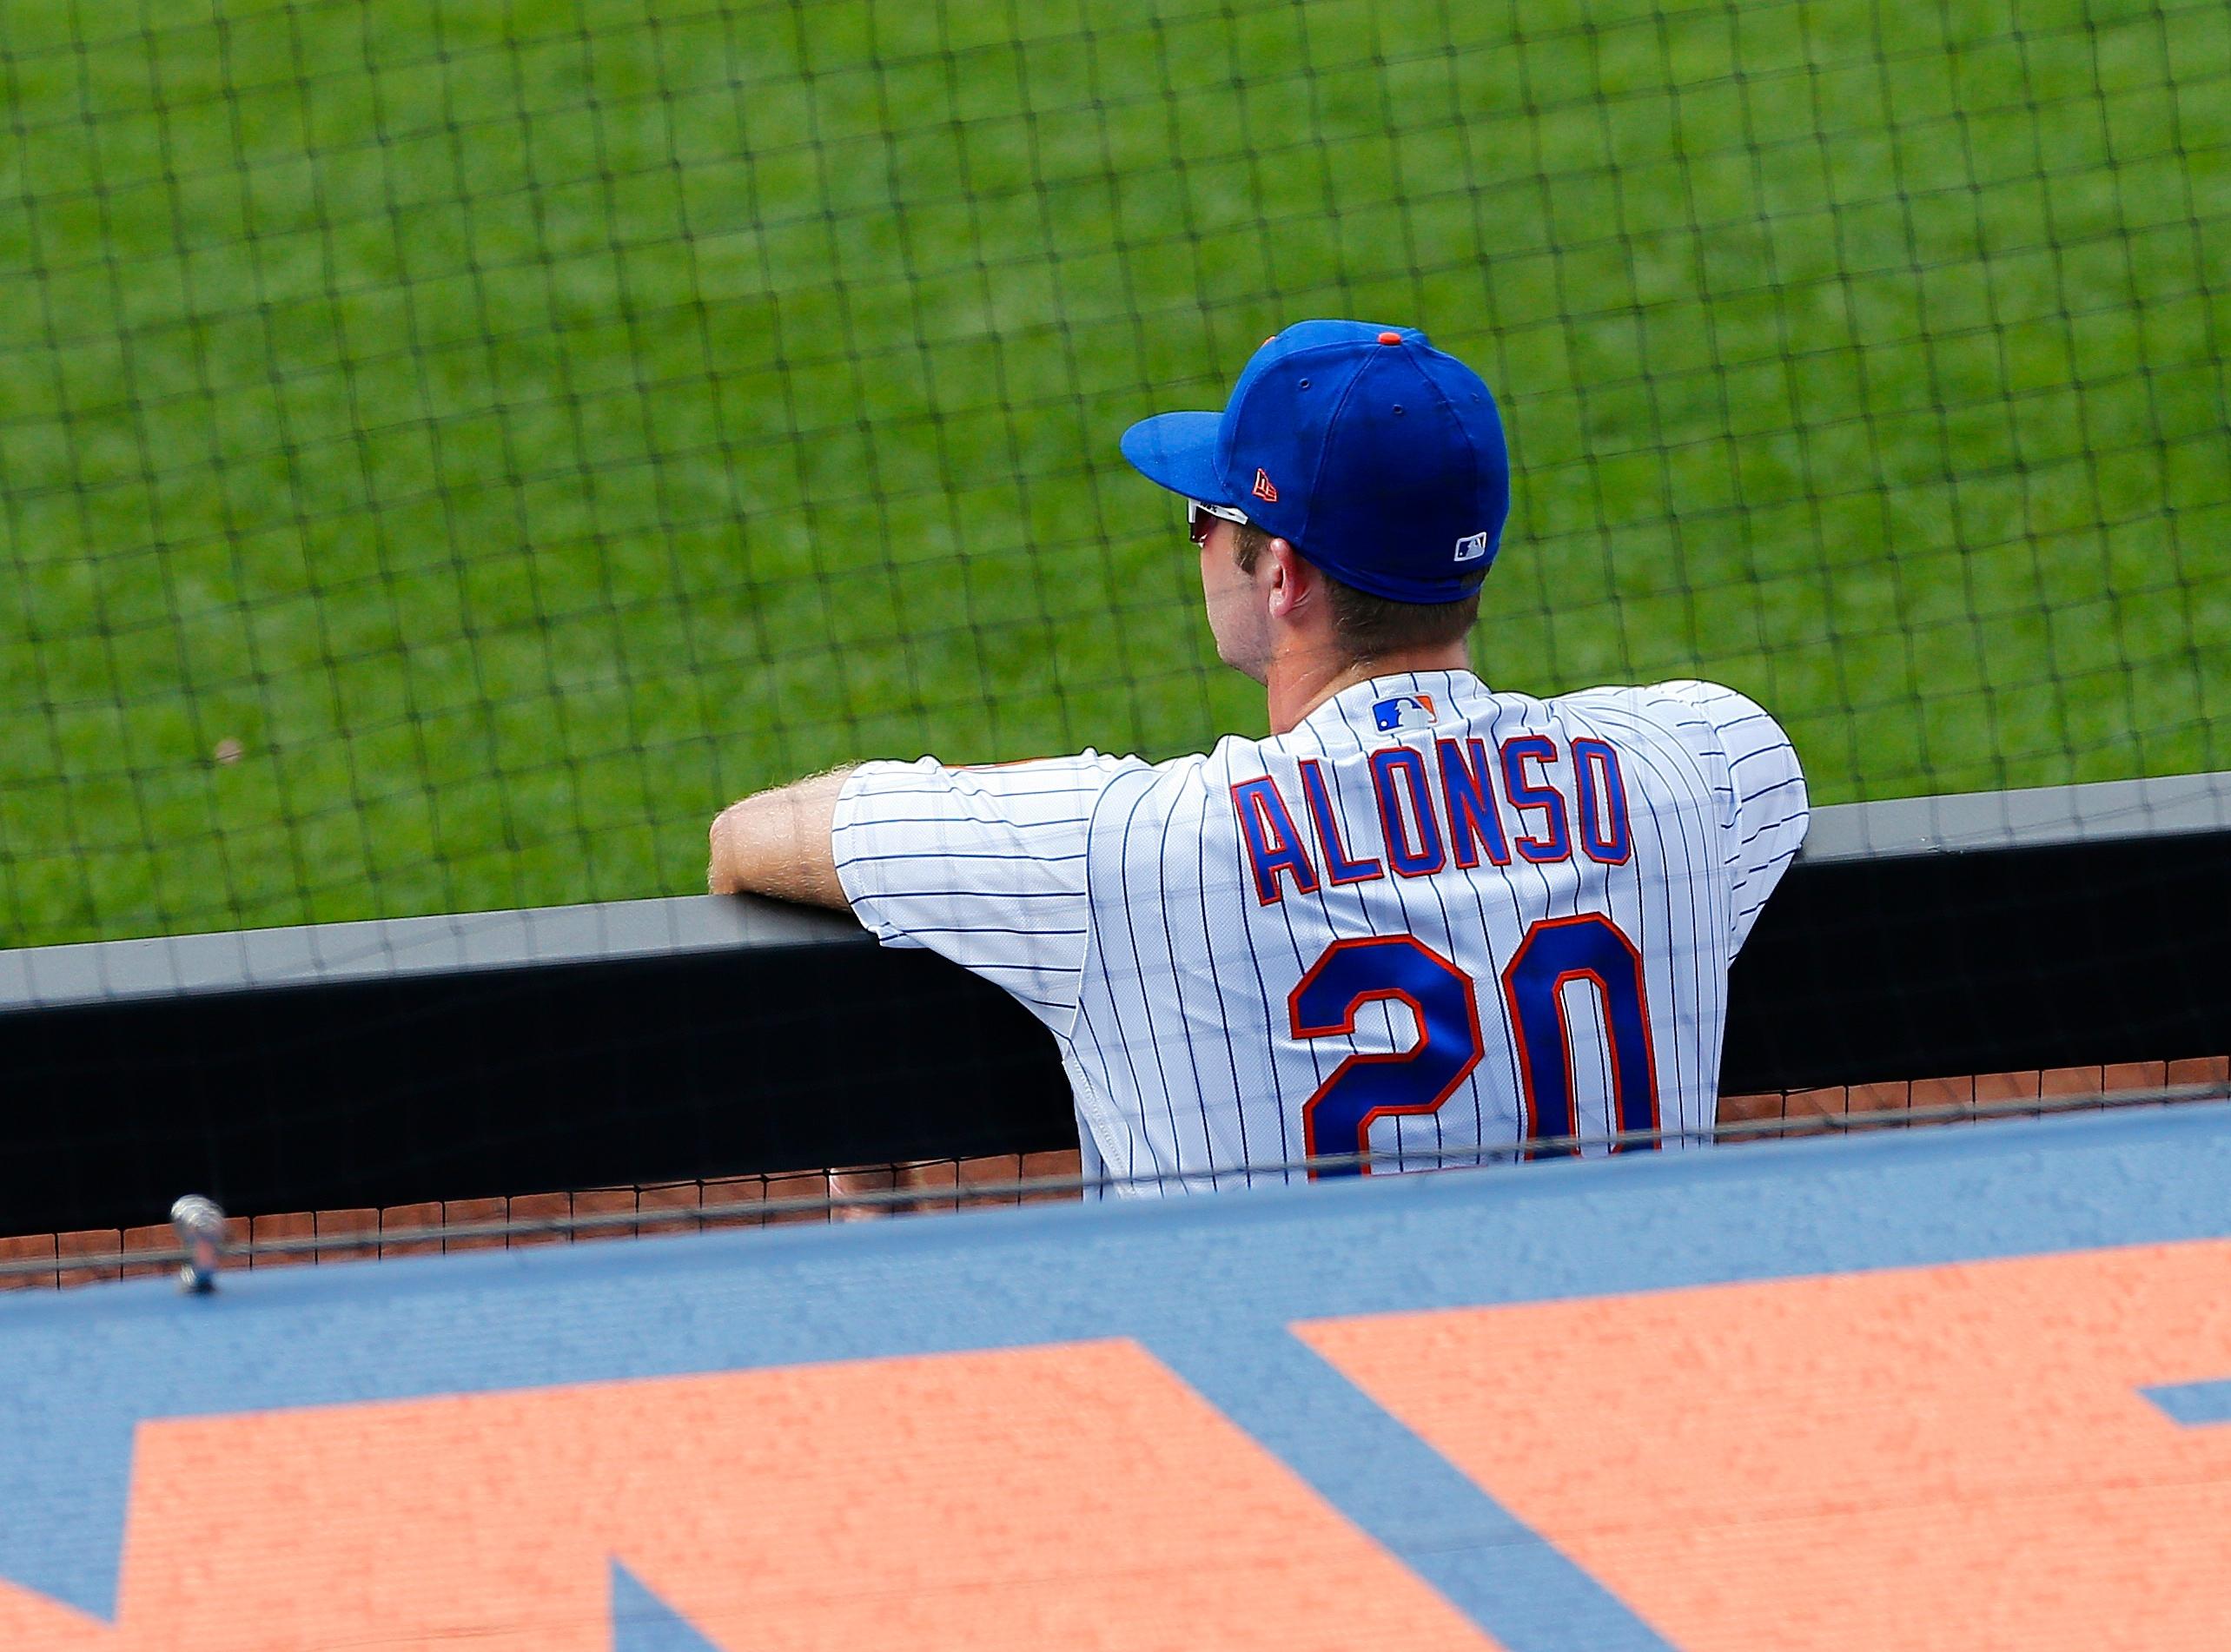 Pete Alonso looks on to the game from the dugout / USA TODAY